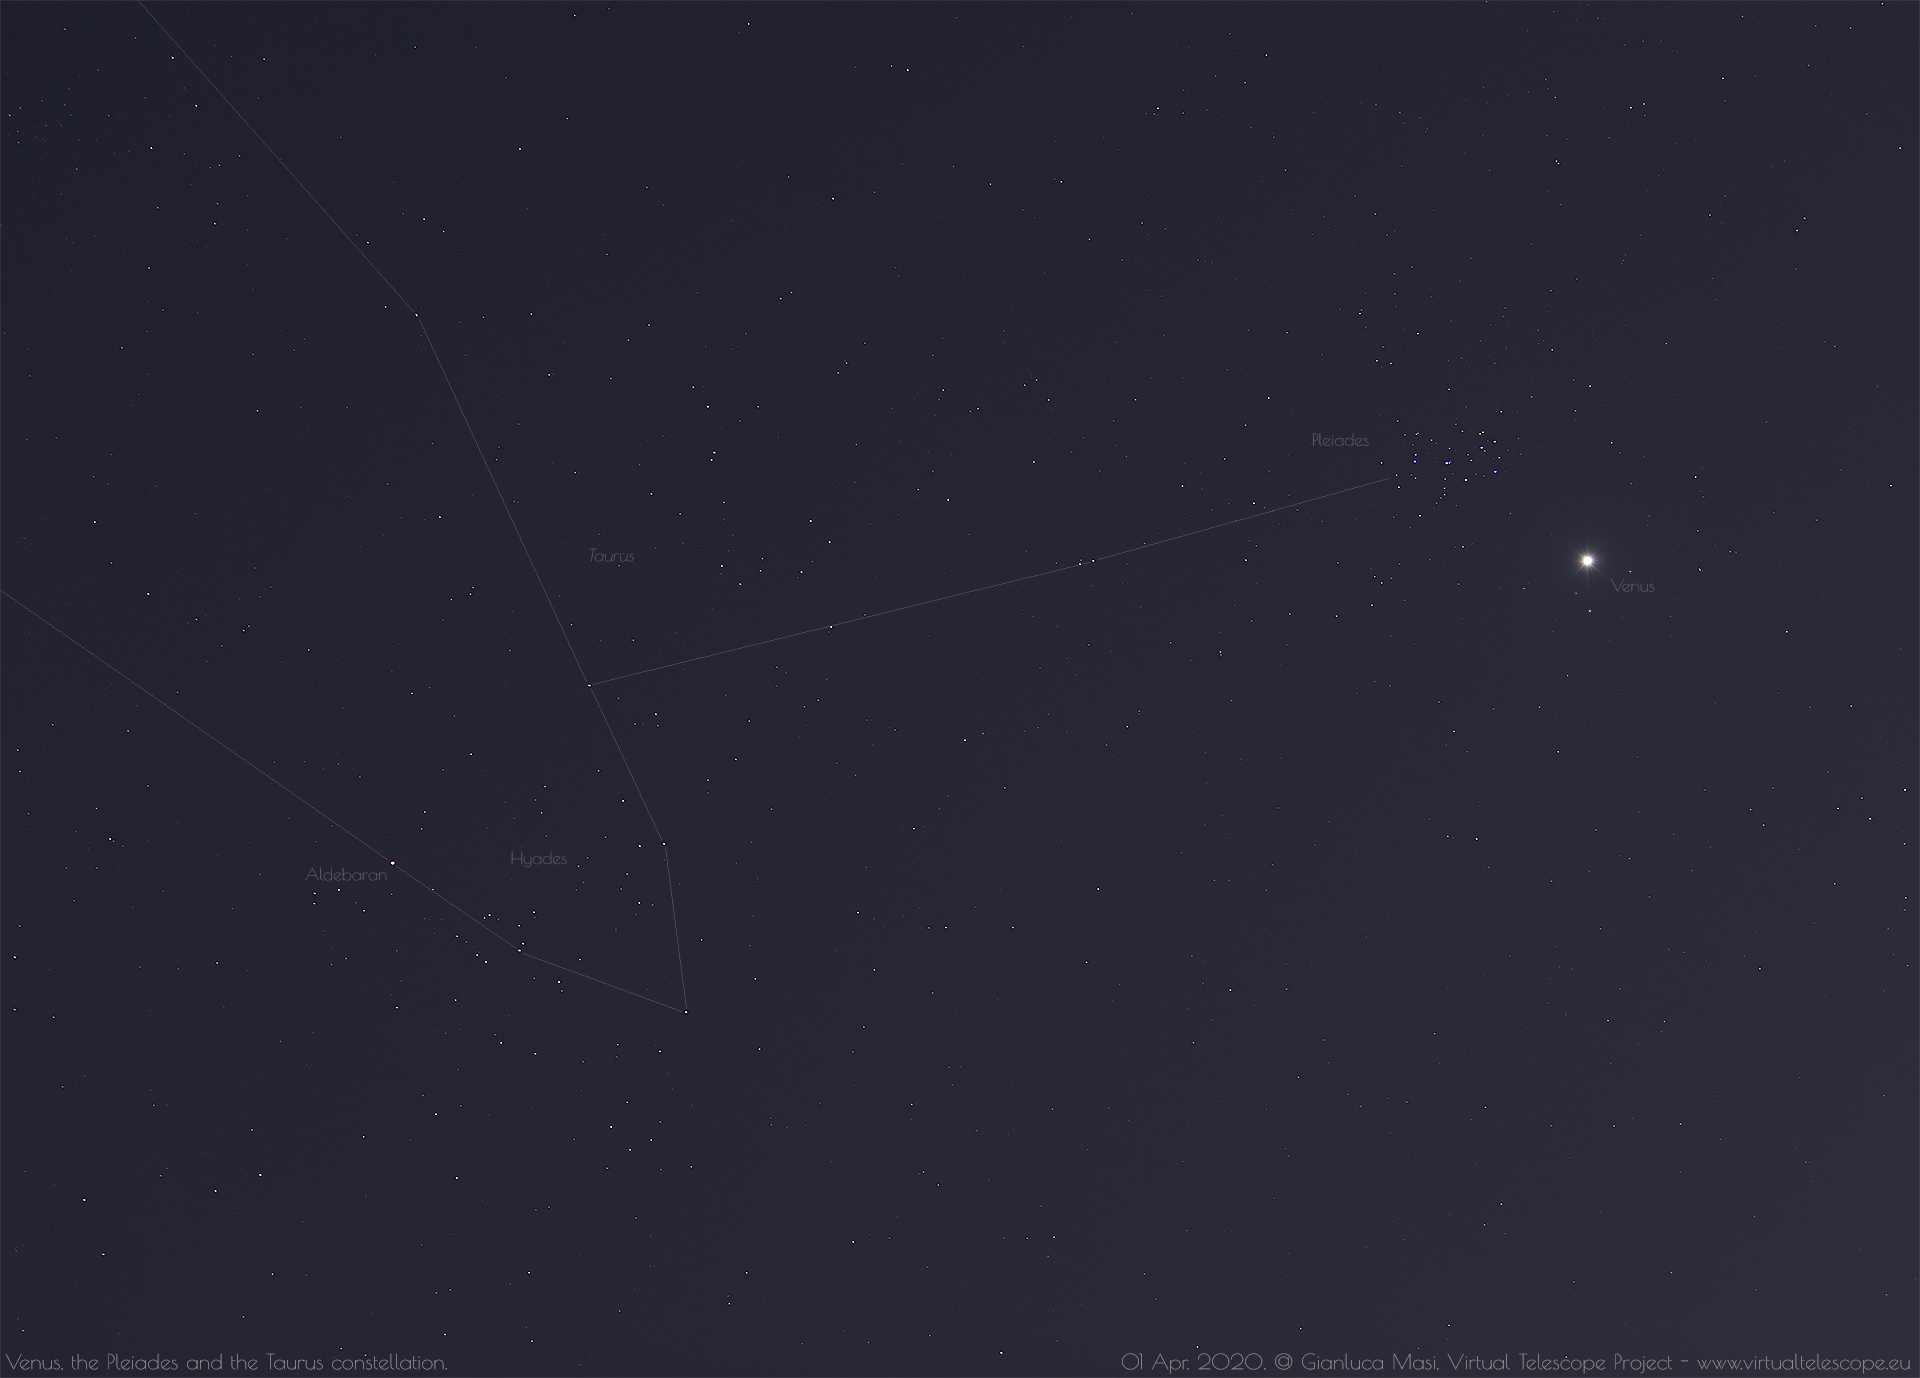 Venus, the Pleiades and part of the Taurus constellation. 1 Apr. 2020